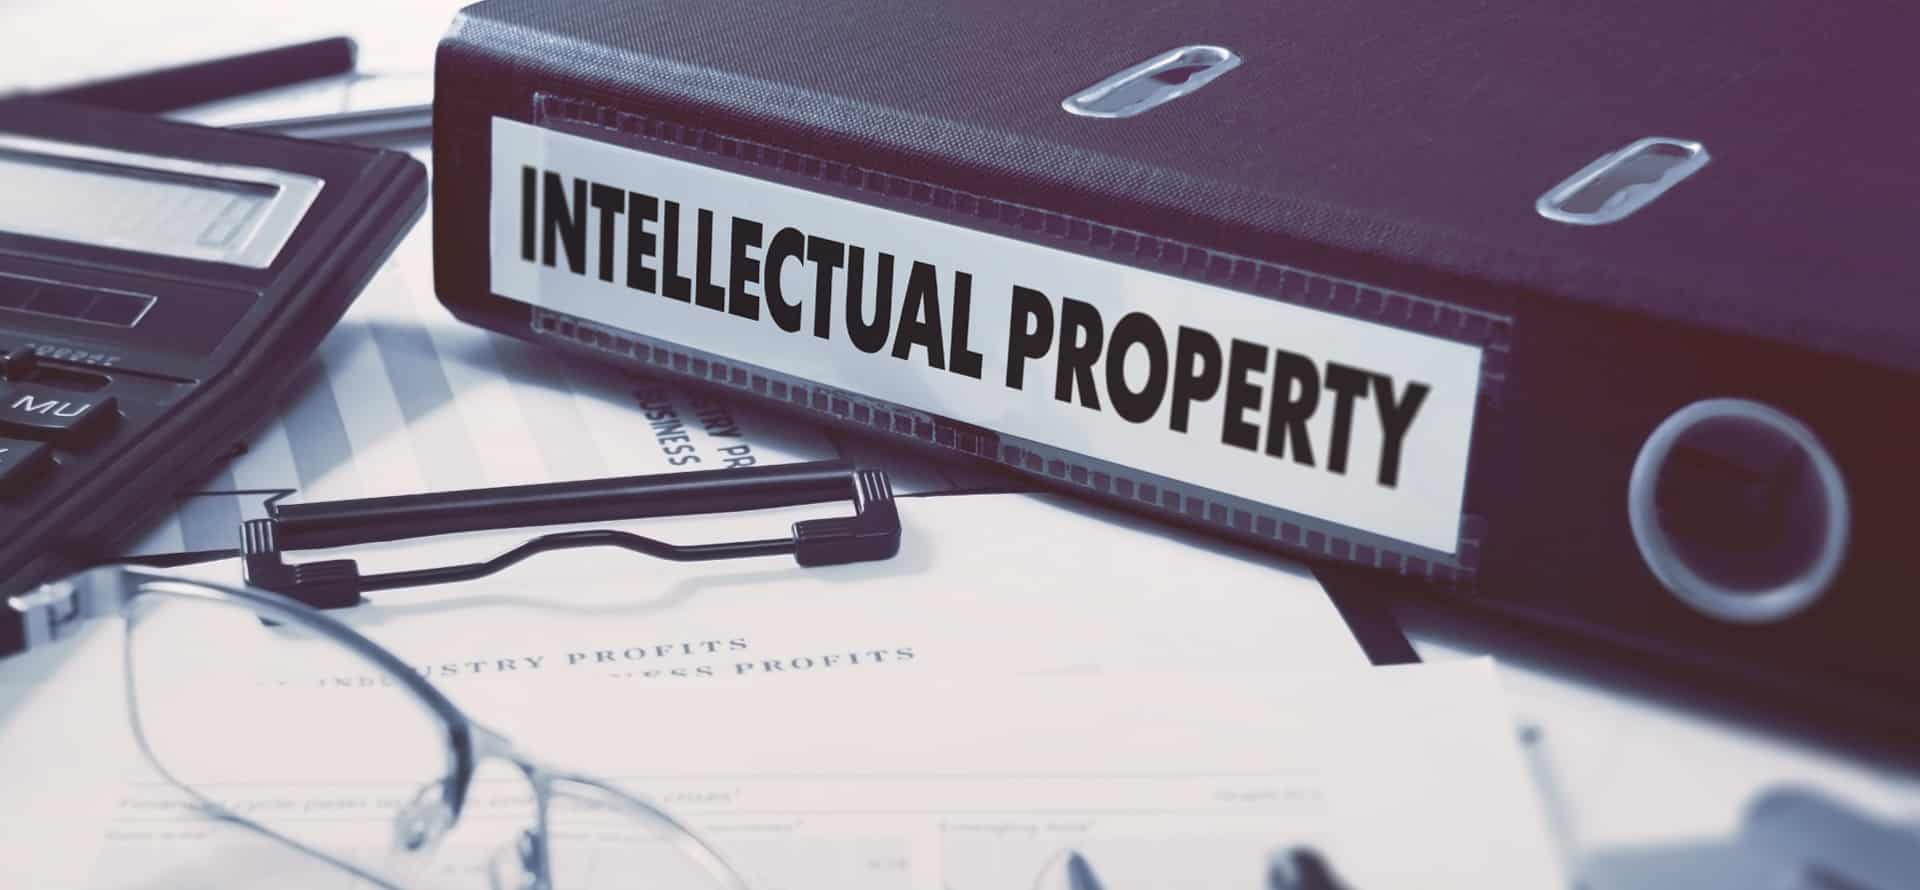 Intellectual Property Law Team in Thailand